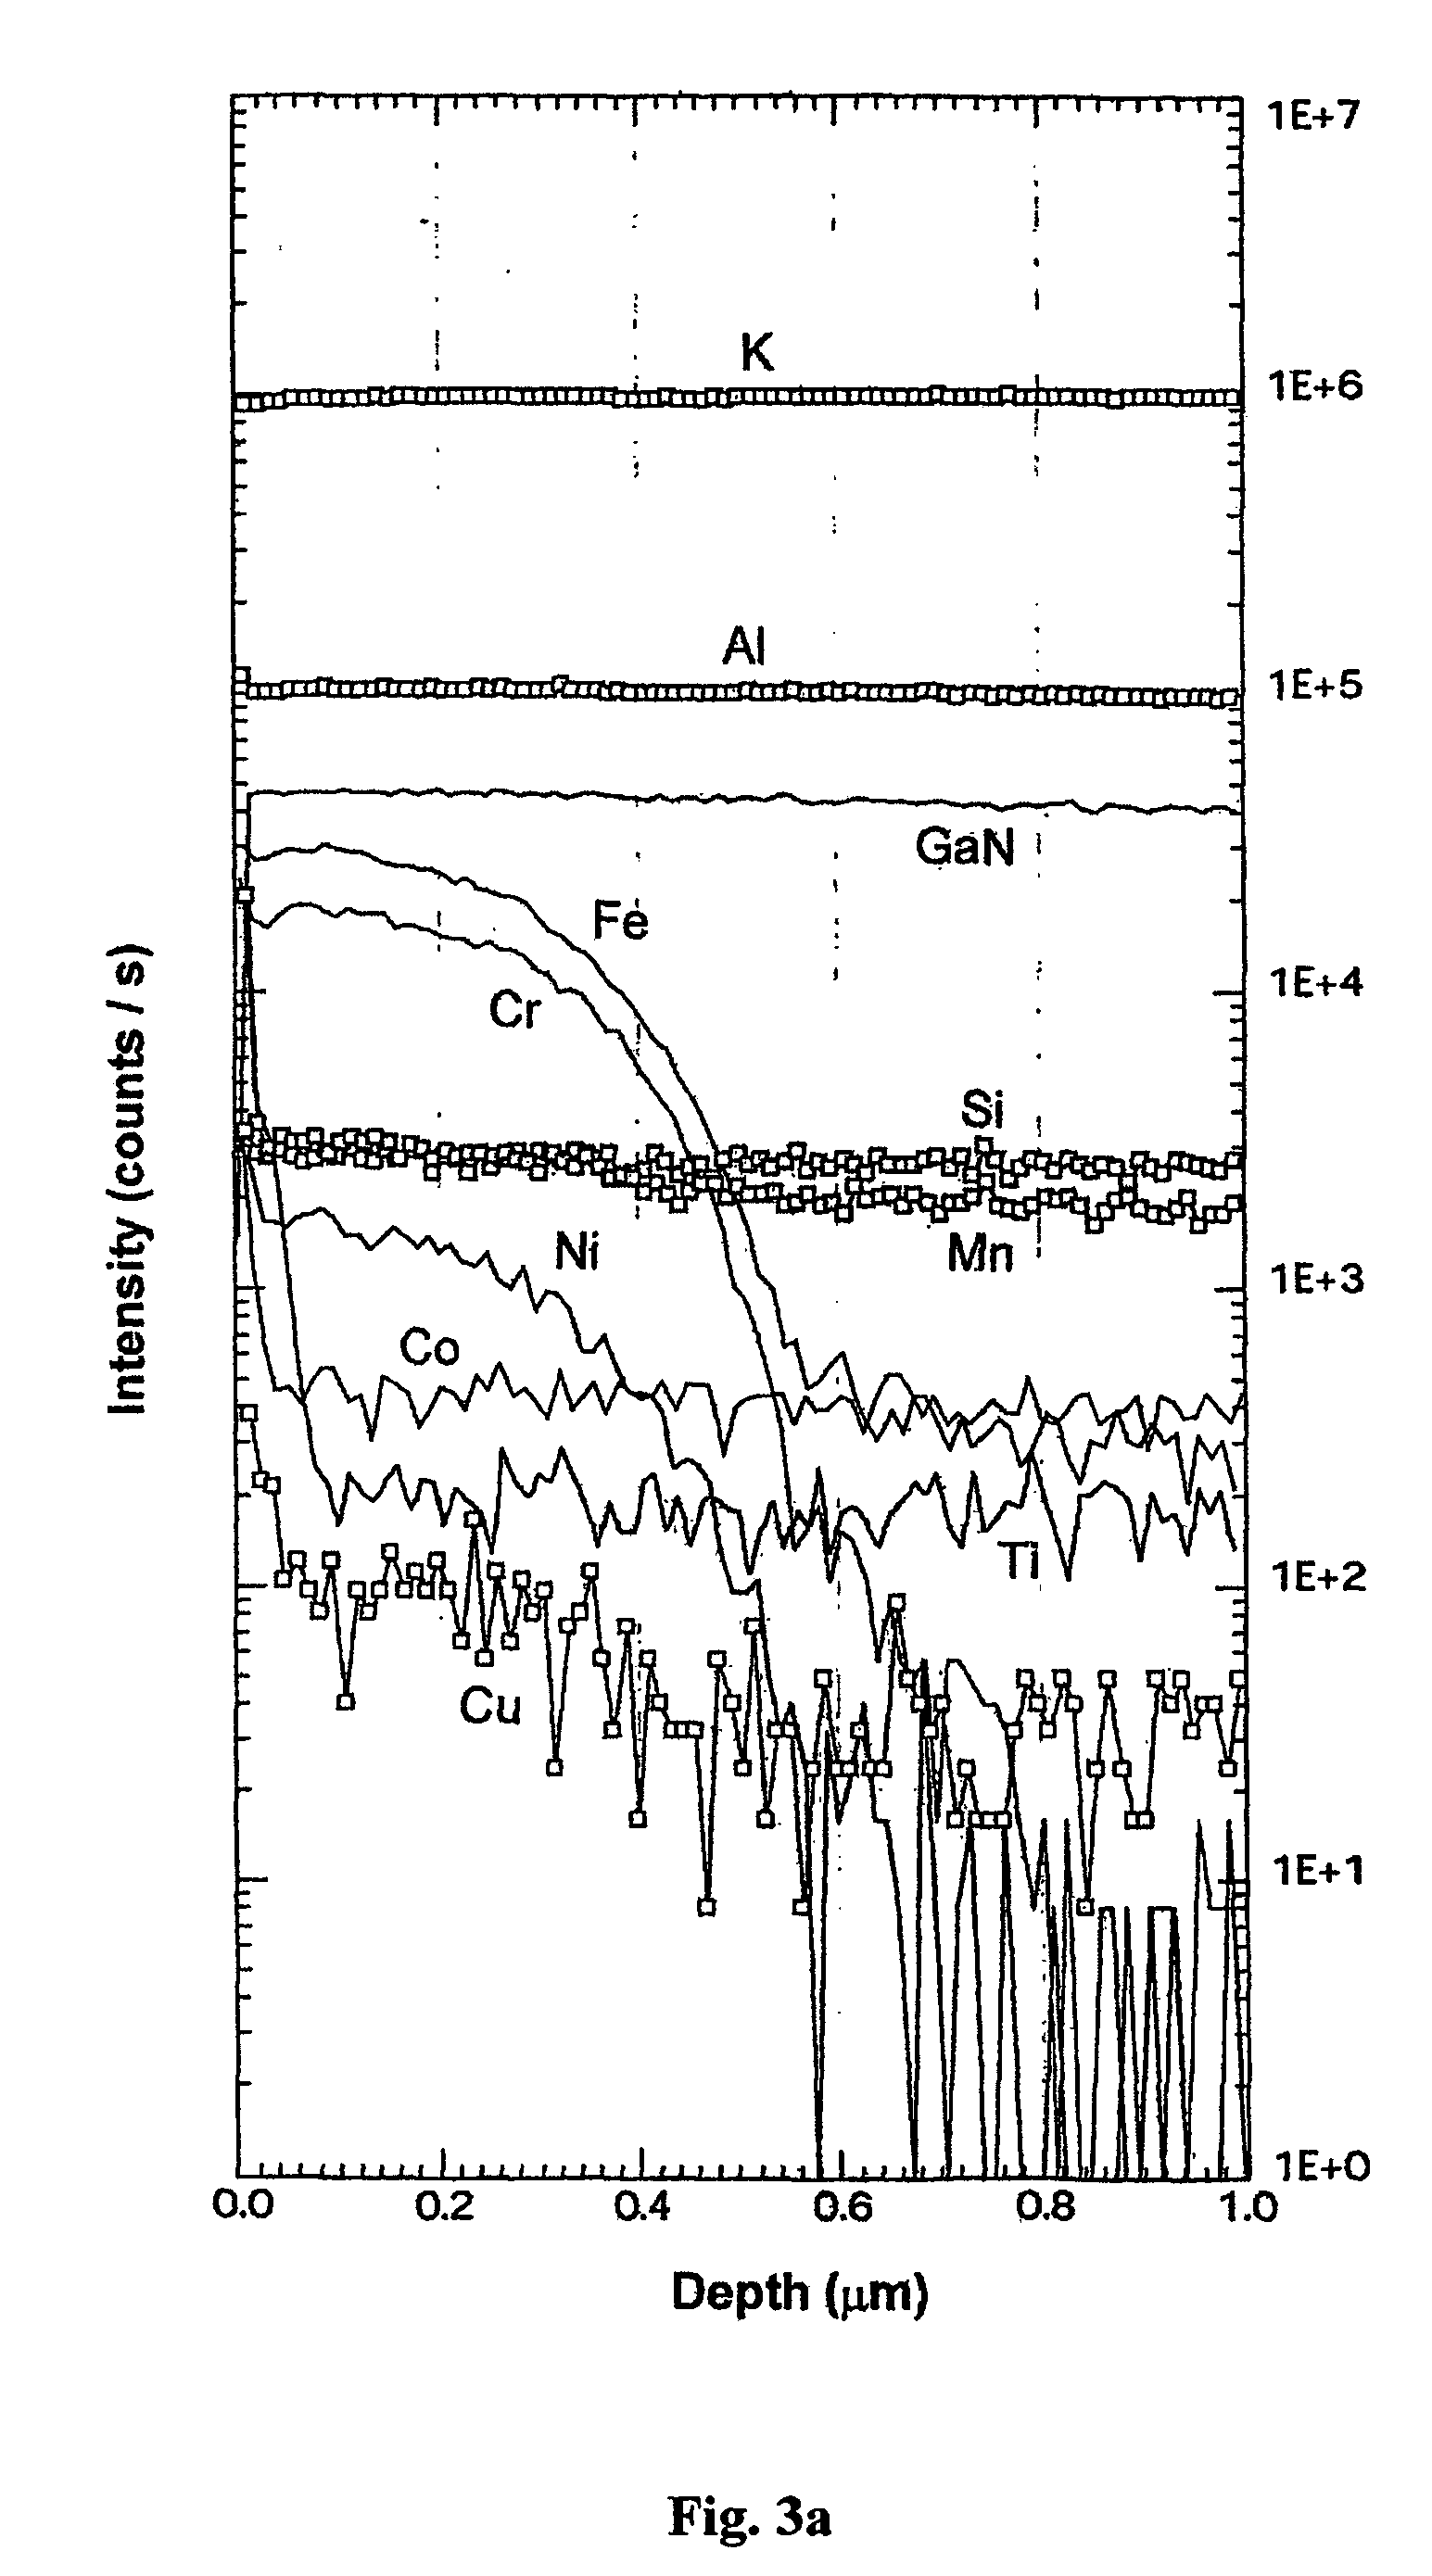 Bulk nitride mono-crystal including substrate for epitaxy